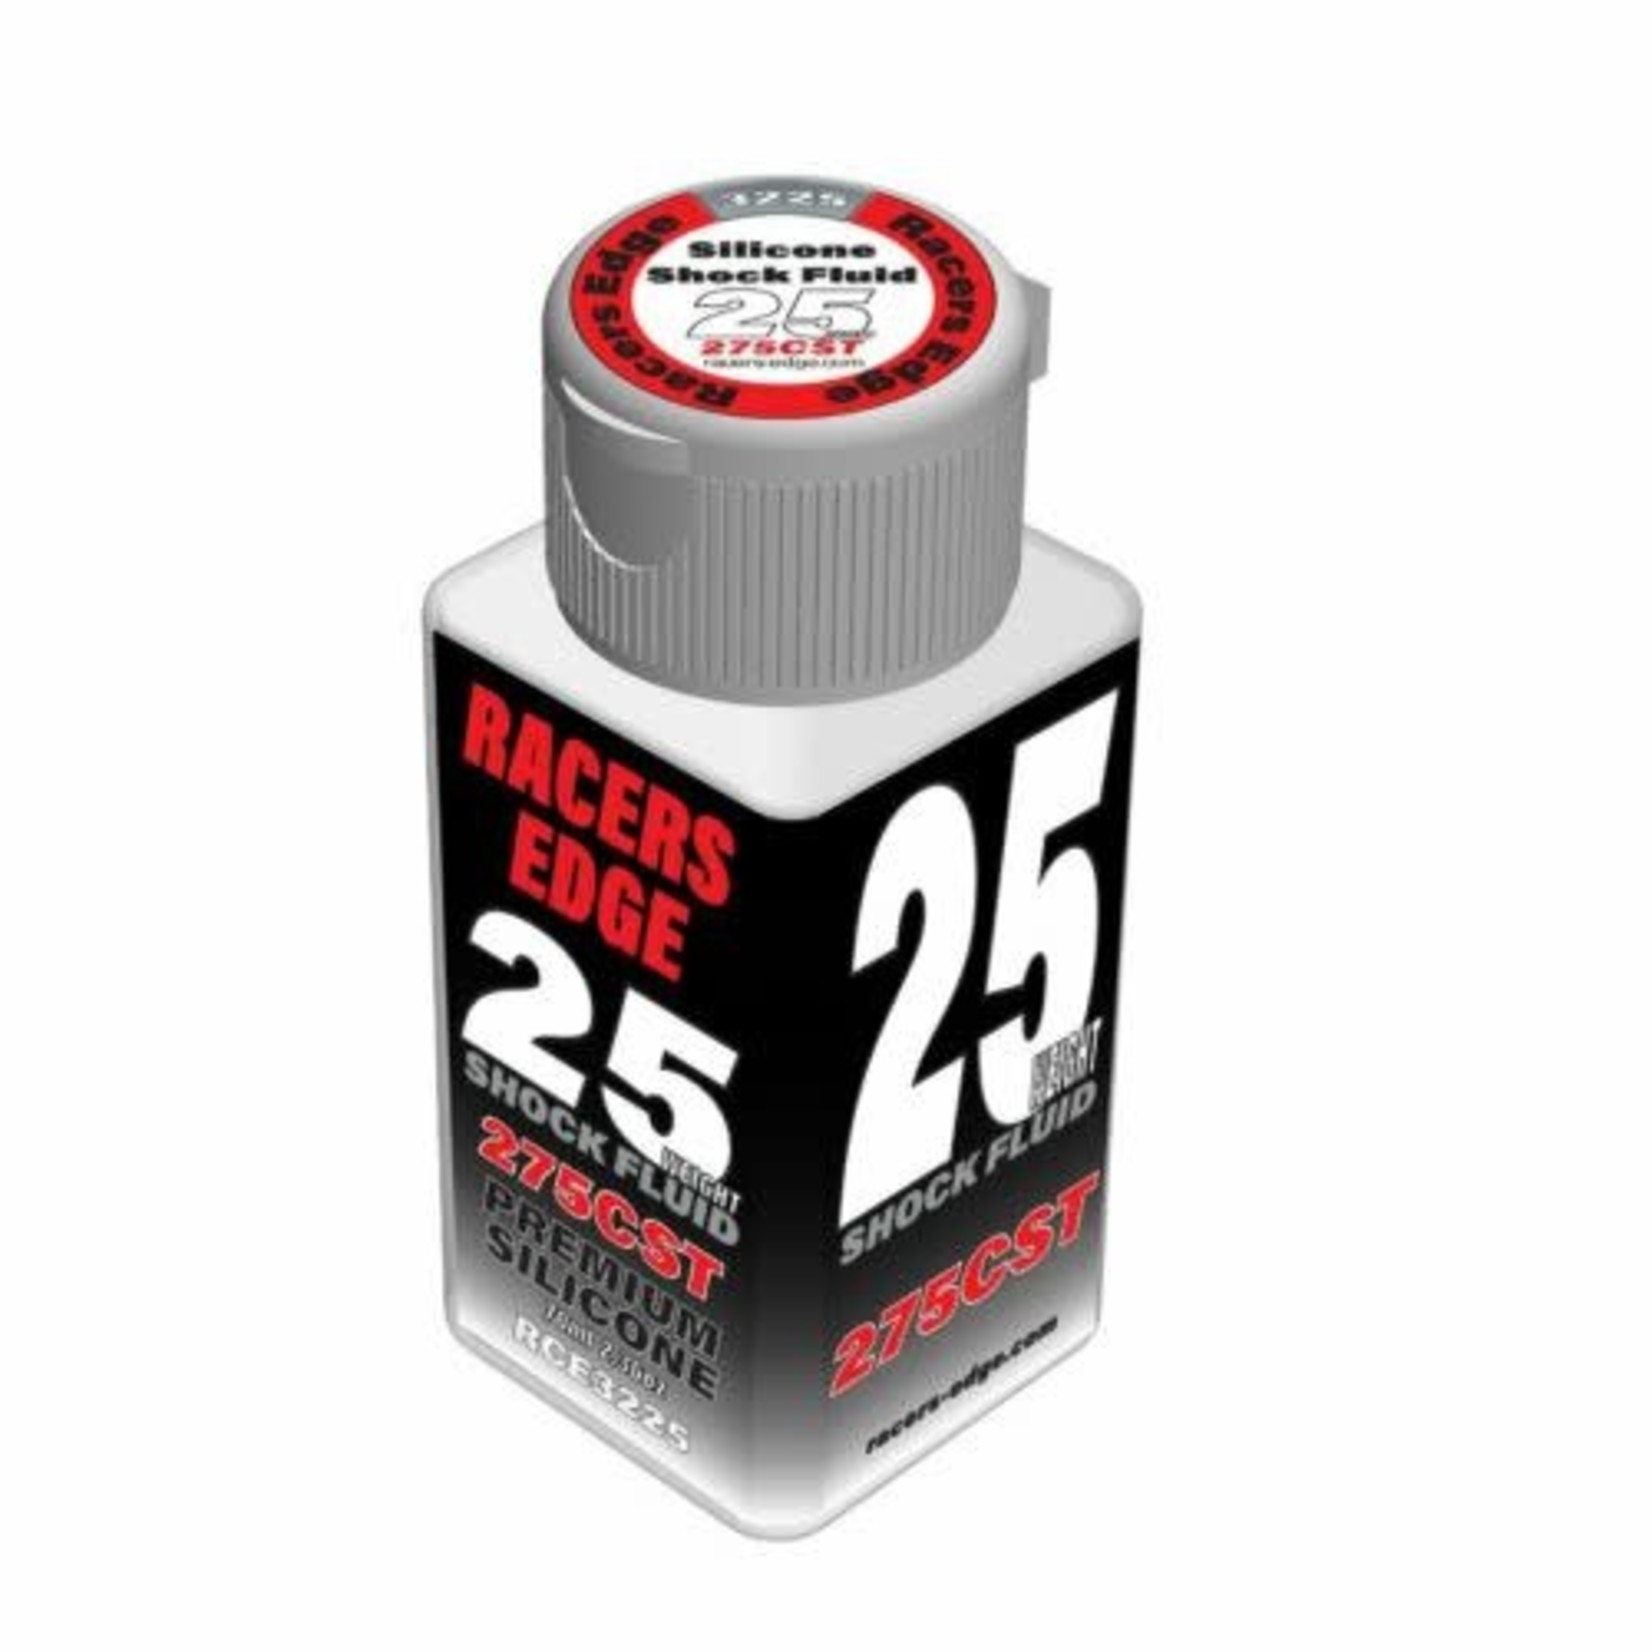 Racers Edge 25 Weight 275cst 70ml Pure Silicone Shock Oil